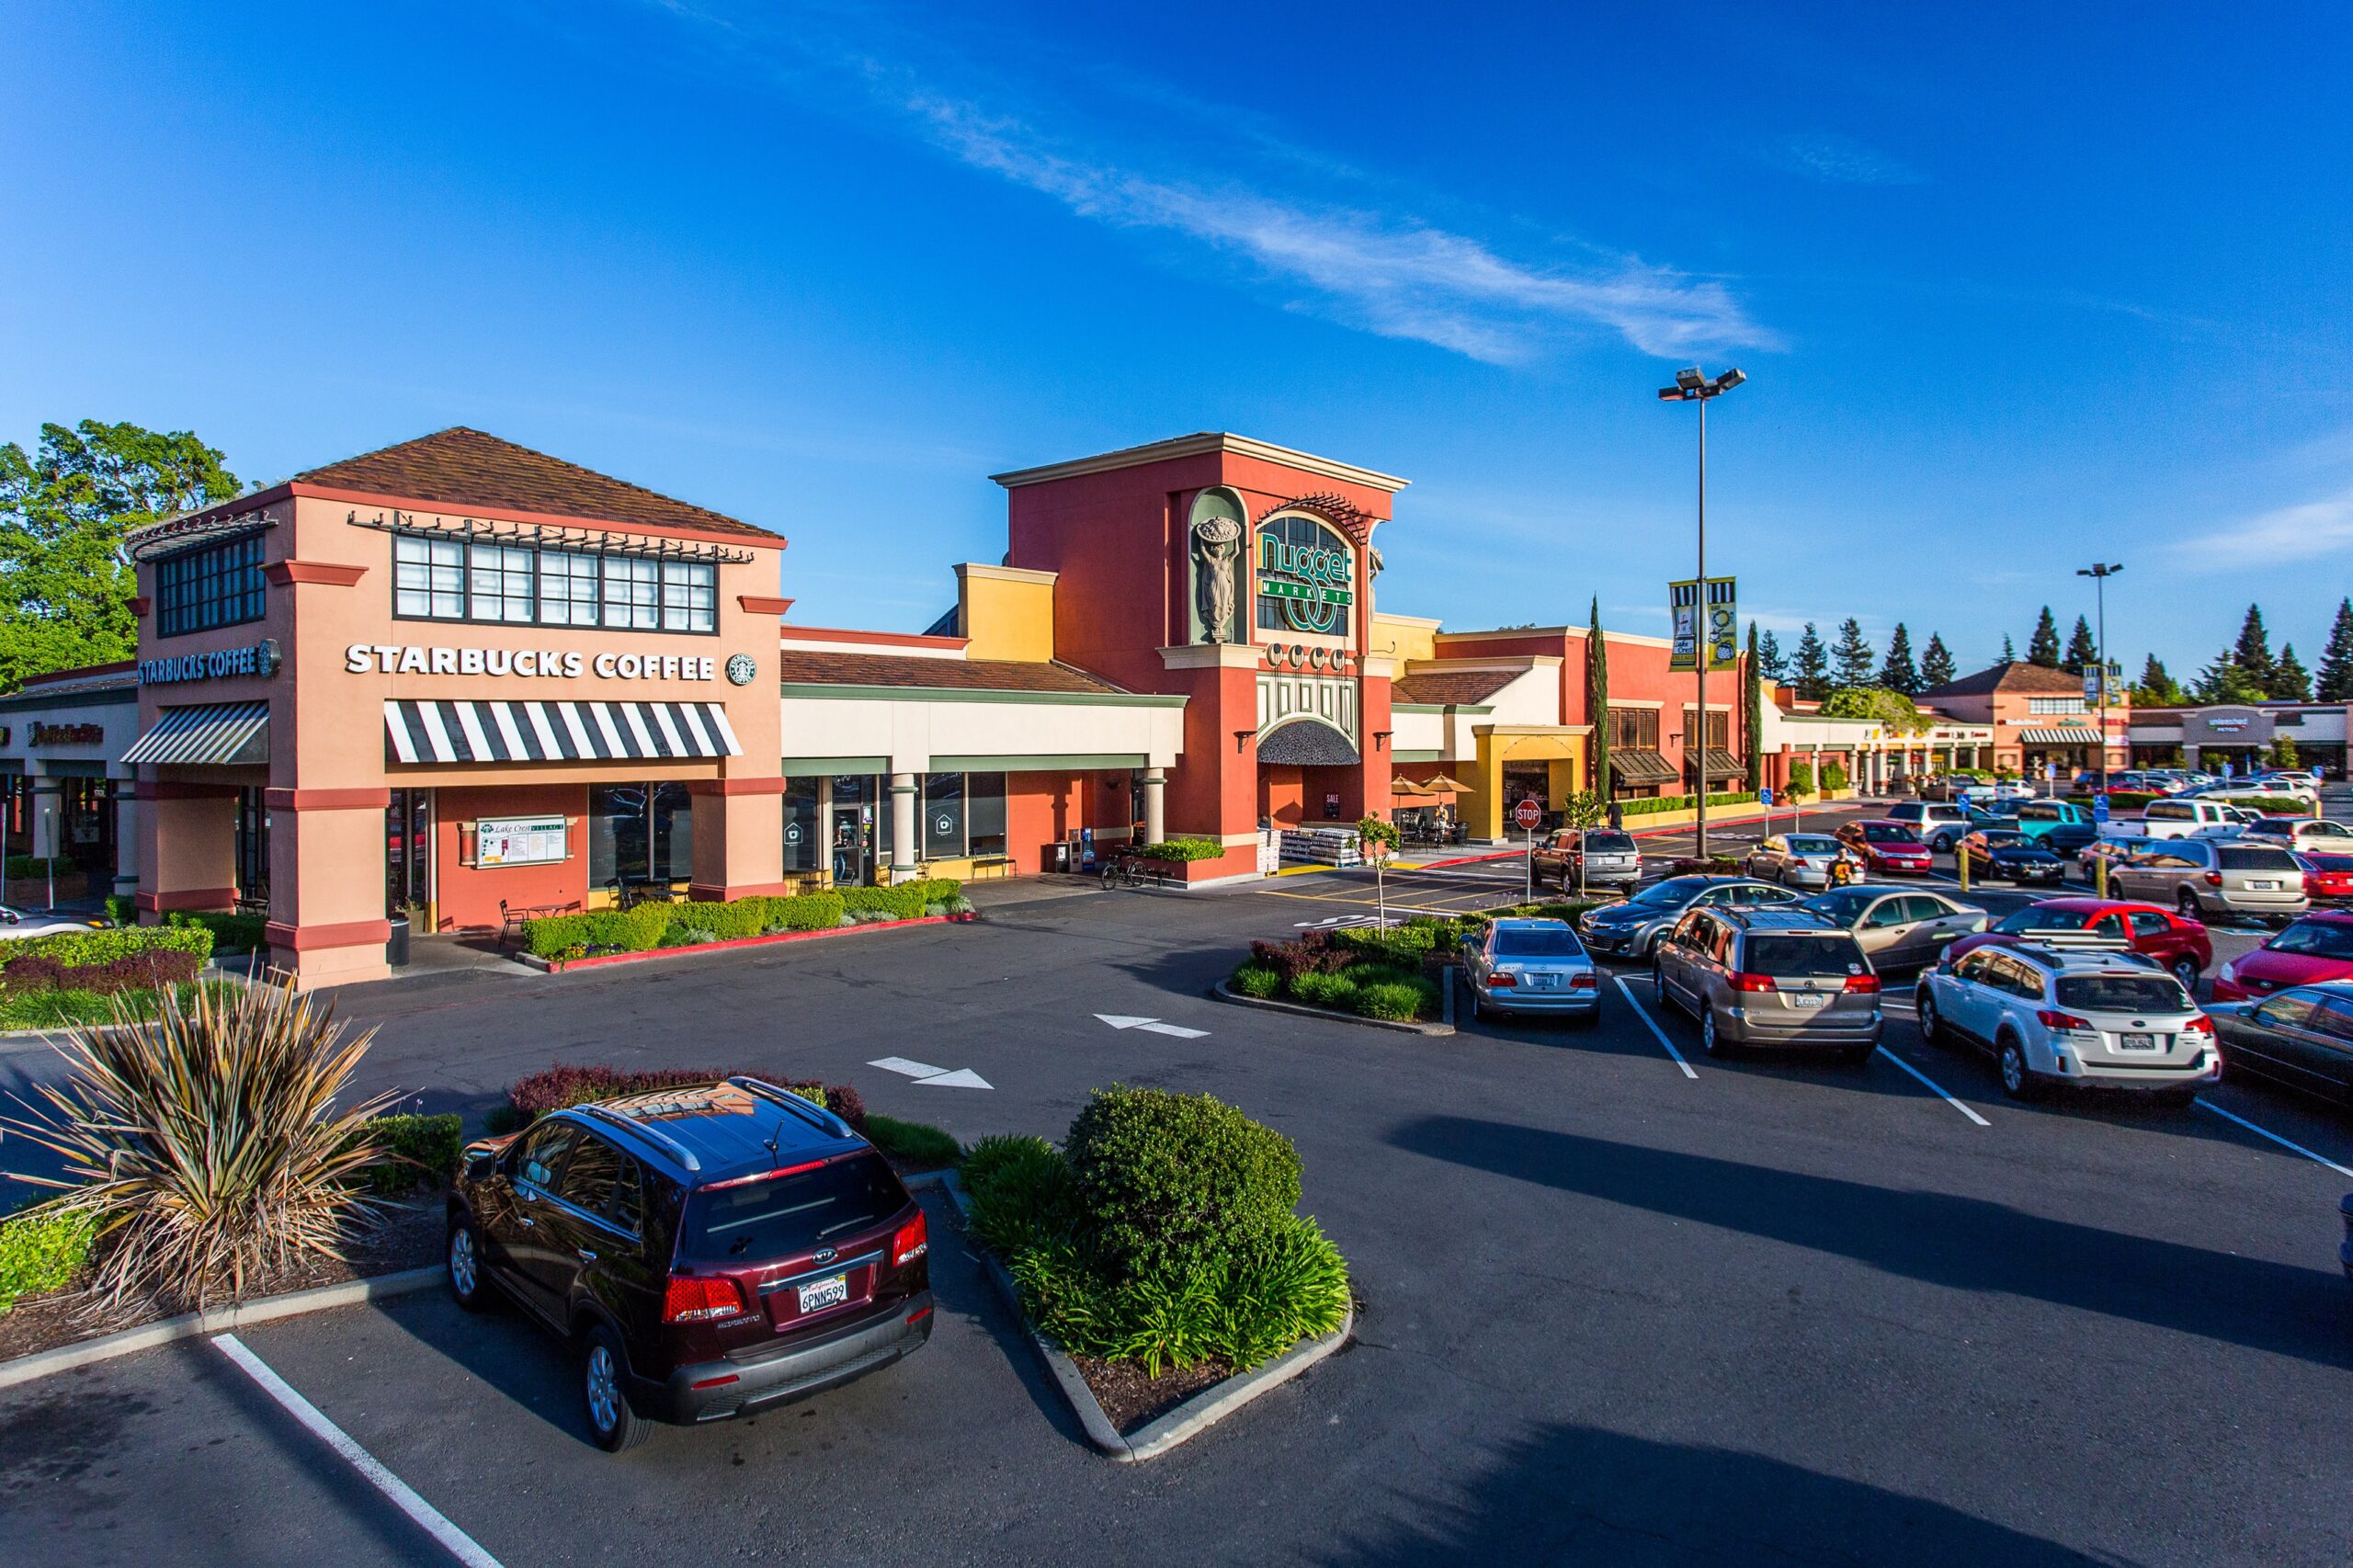 Photo of the Nugget parking lot located in Lake Crest Village shopping center.